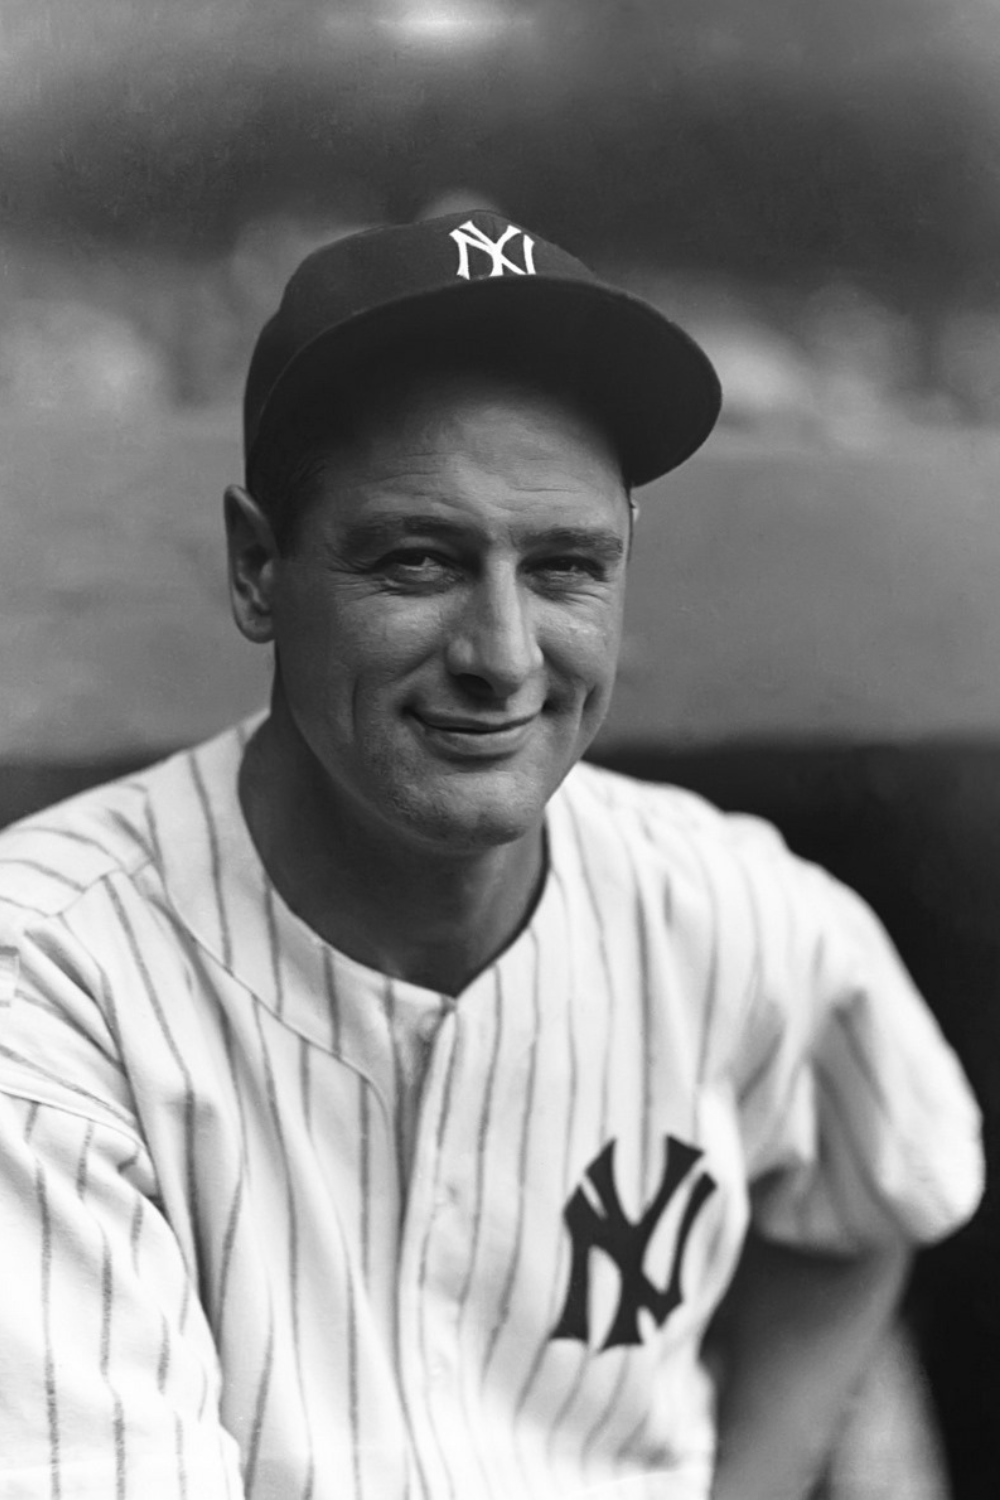 The Late Lou Gehrig Who Played Professional Baseball From 1923-1939